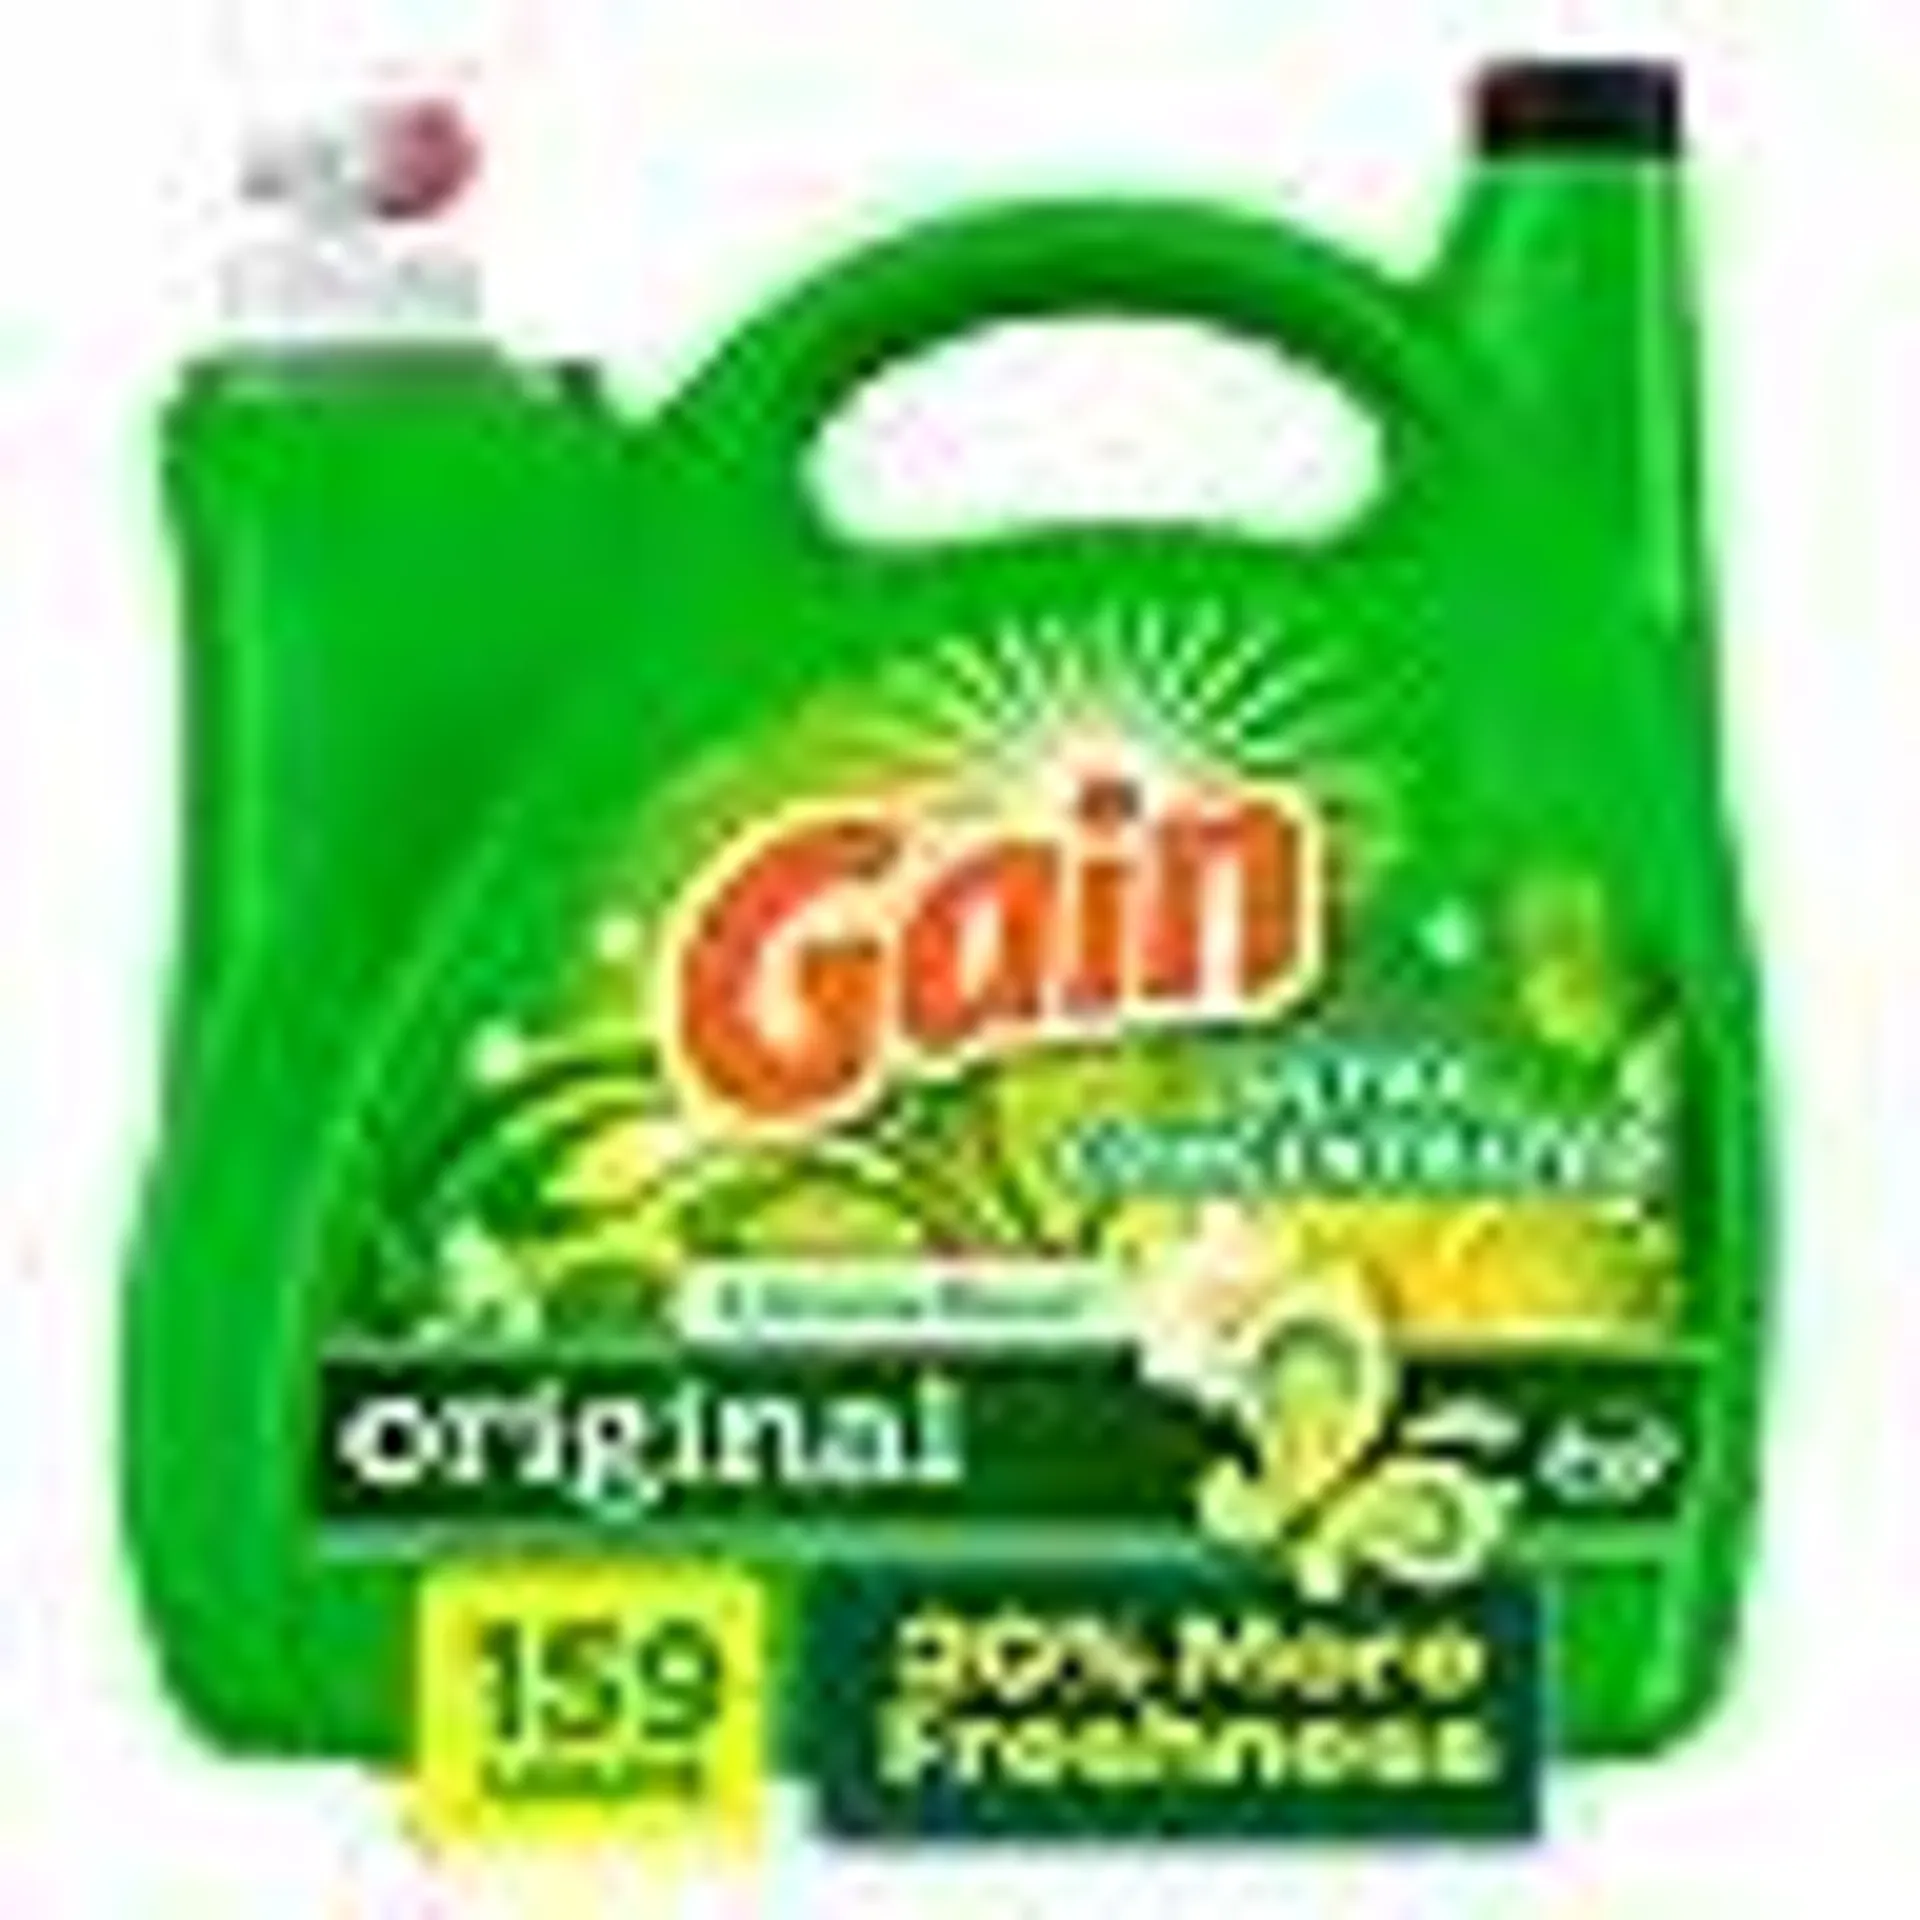 Gain Ultra Concentrated + Aroma Boost Laundry Detergent, Original Scent 208 fl. oz., 159 loads